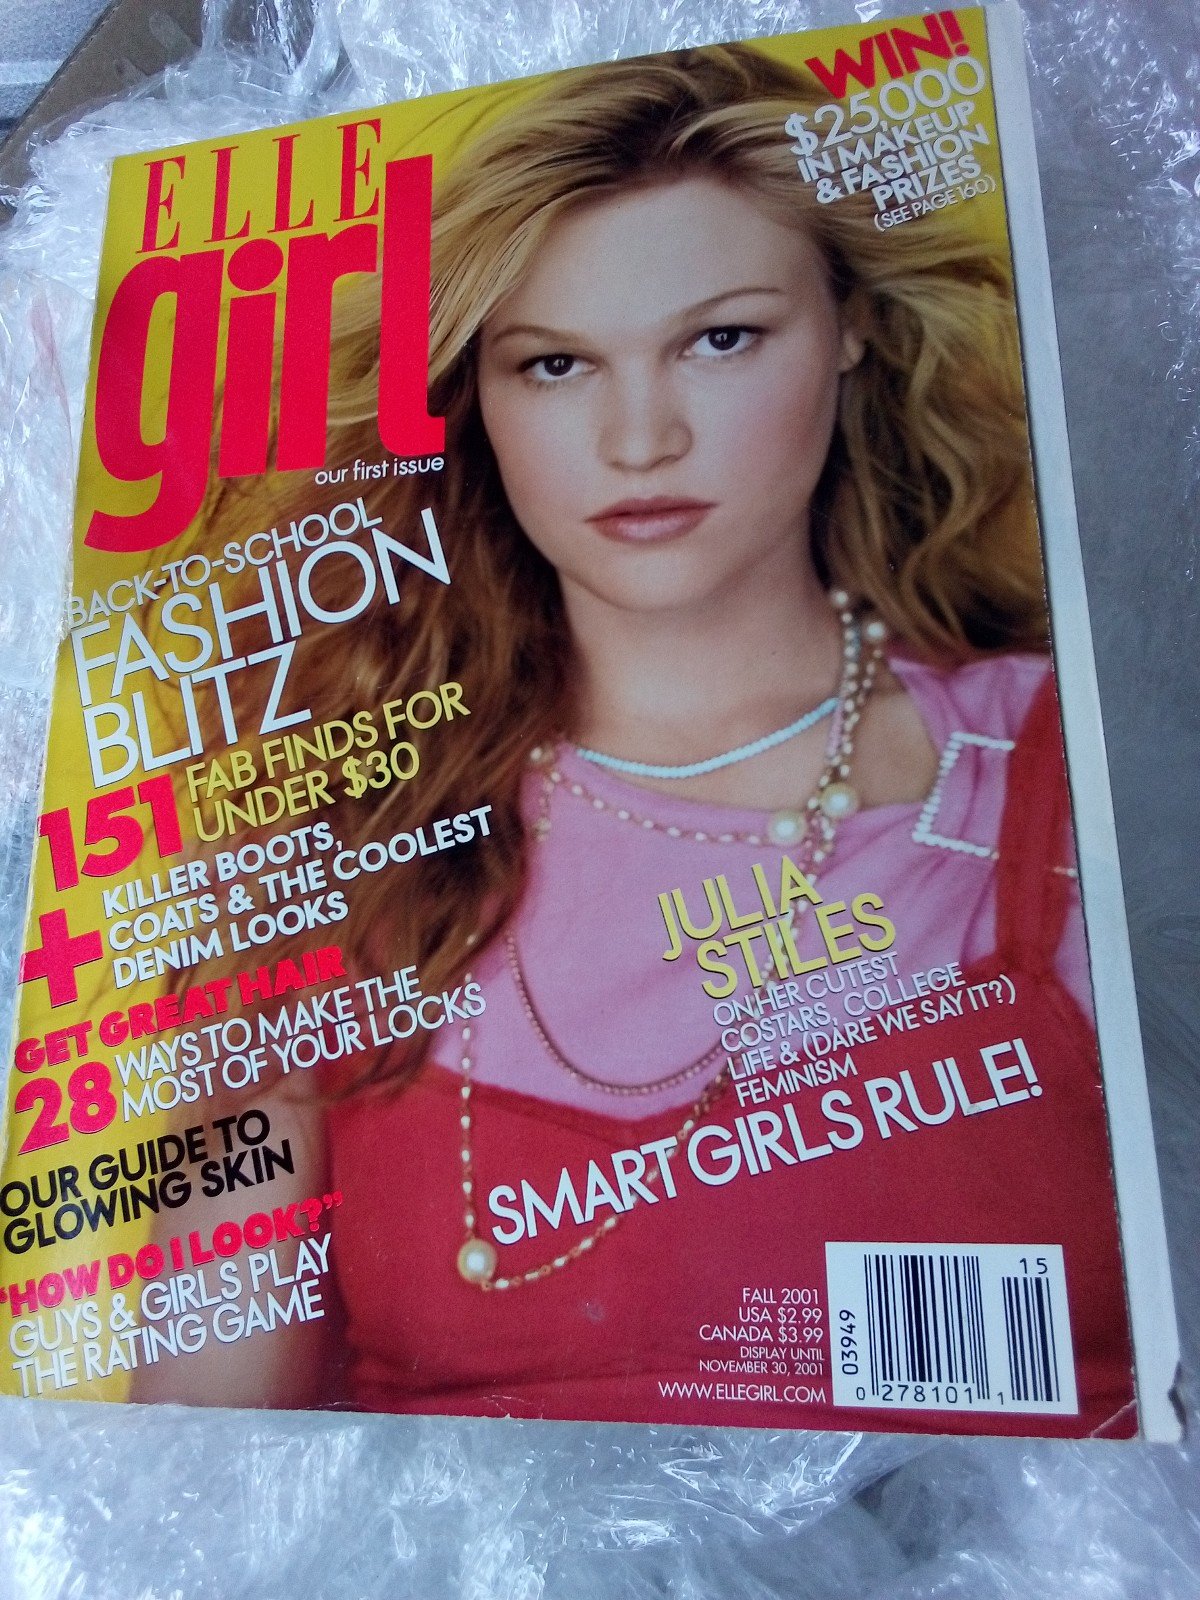 ELLE GIRL Magazine FIRST ISSUE fall 2001 First Edition 